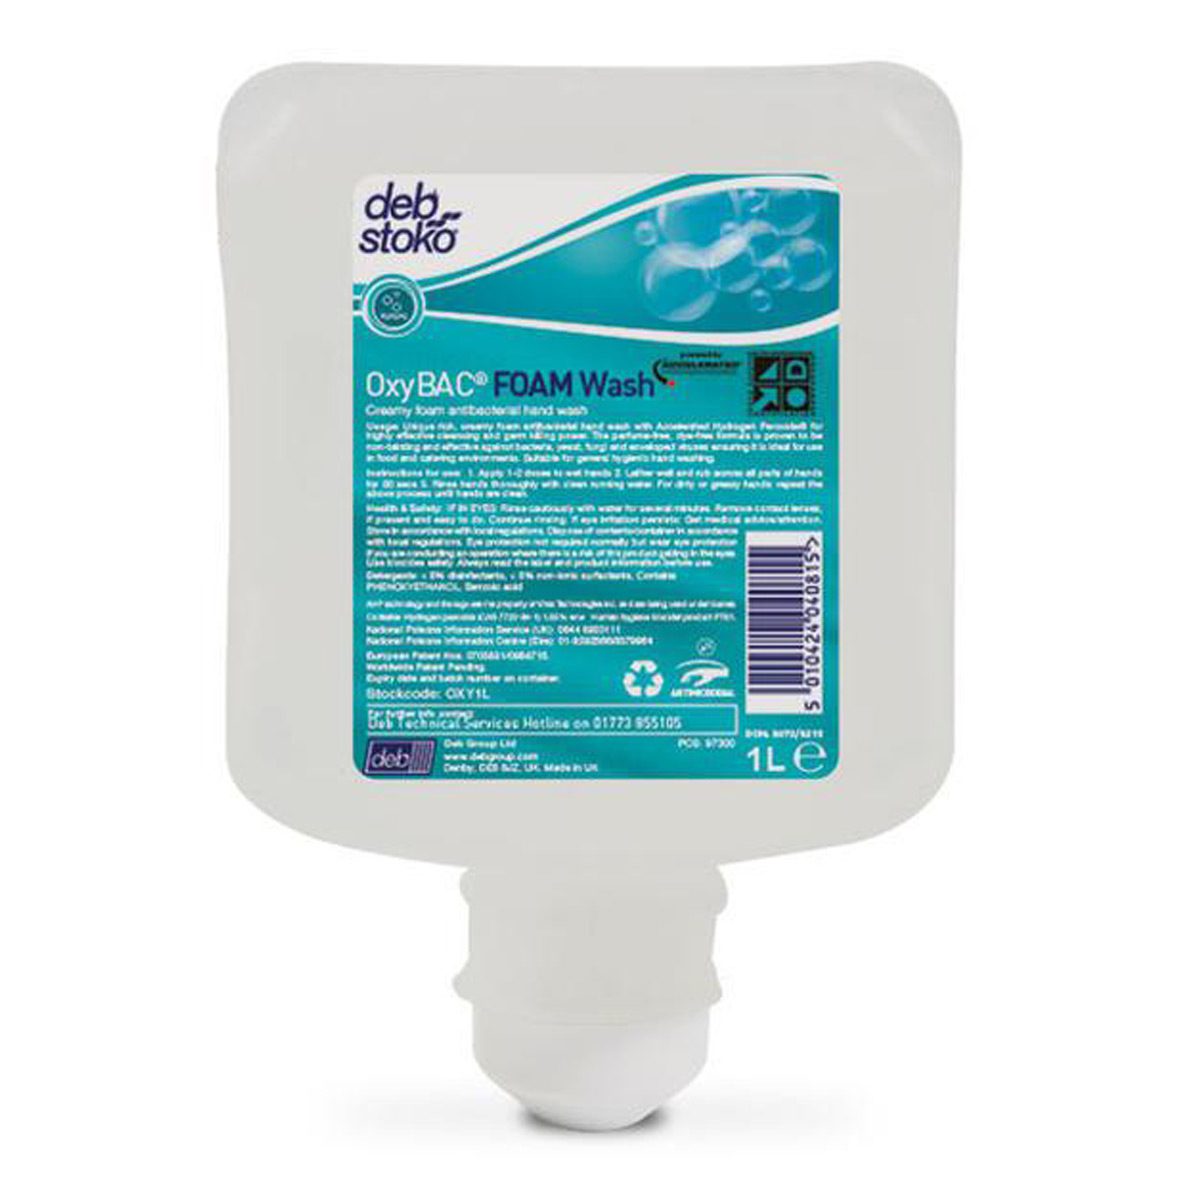 washroom-skincare-hand-soap-deb-stoko-oxy-bac-1L-litre-highly-effective-perfume-free-dye-free-antibacterial-foam-hand-wash-accelerated-hydrogen -peroxide-vjs-distributors-OXY1L